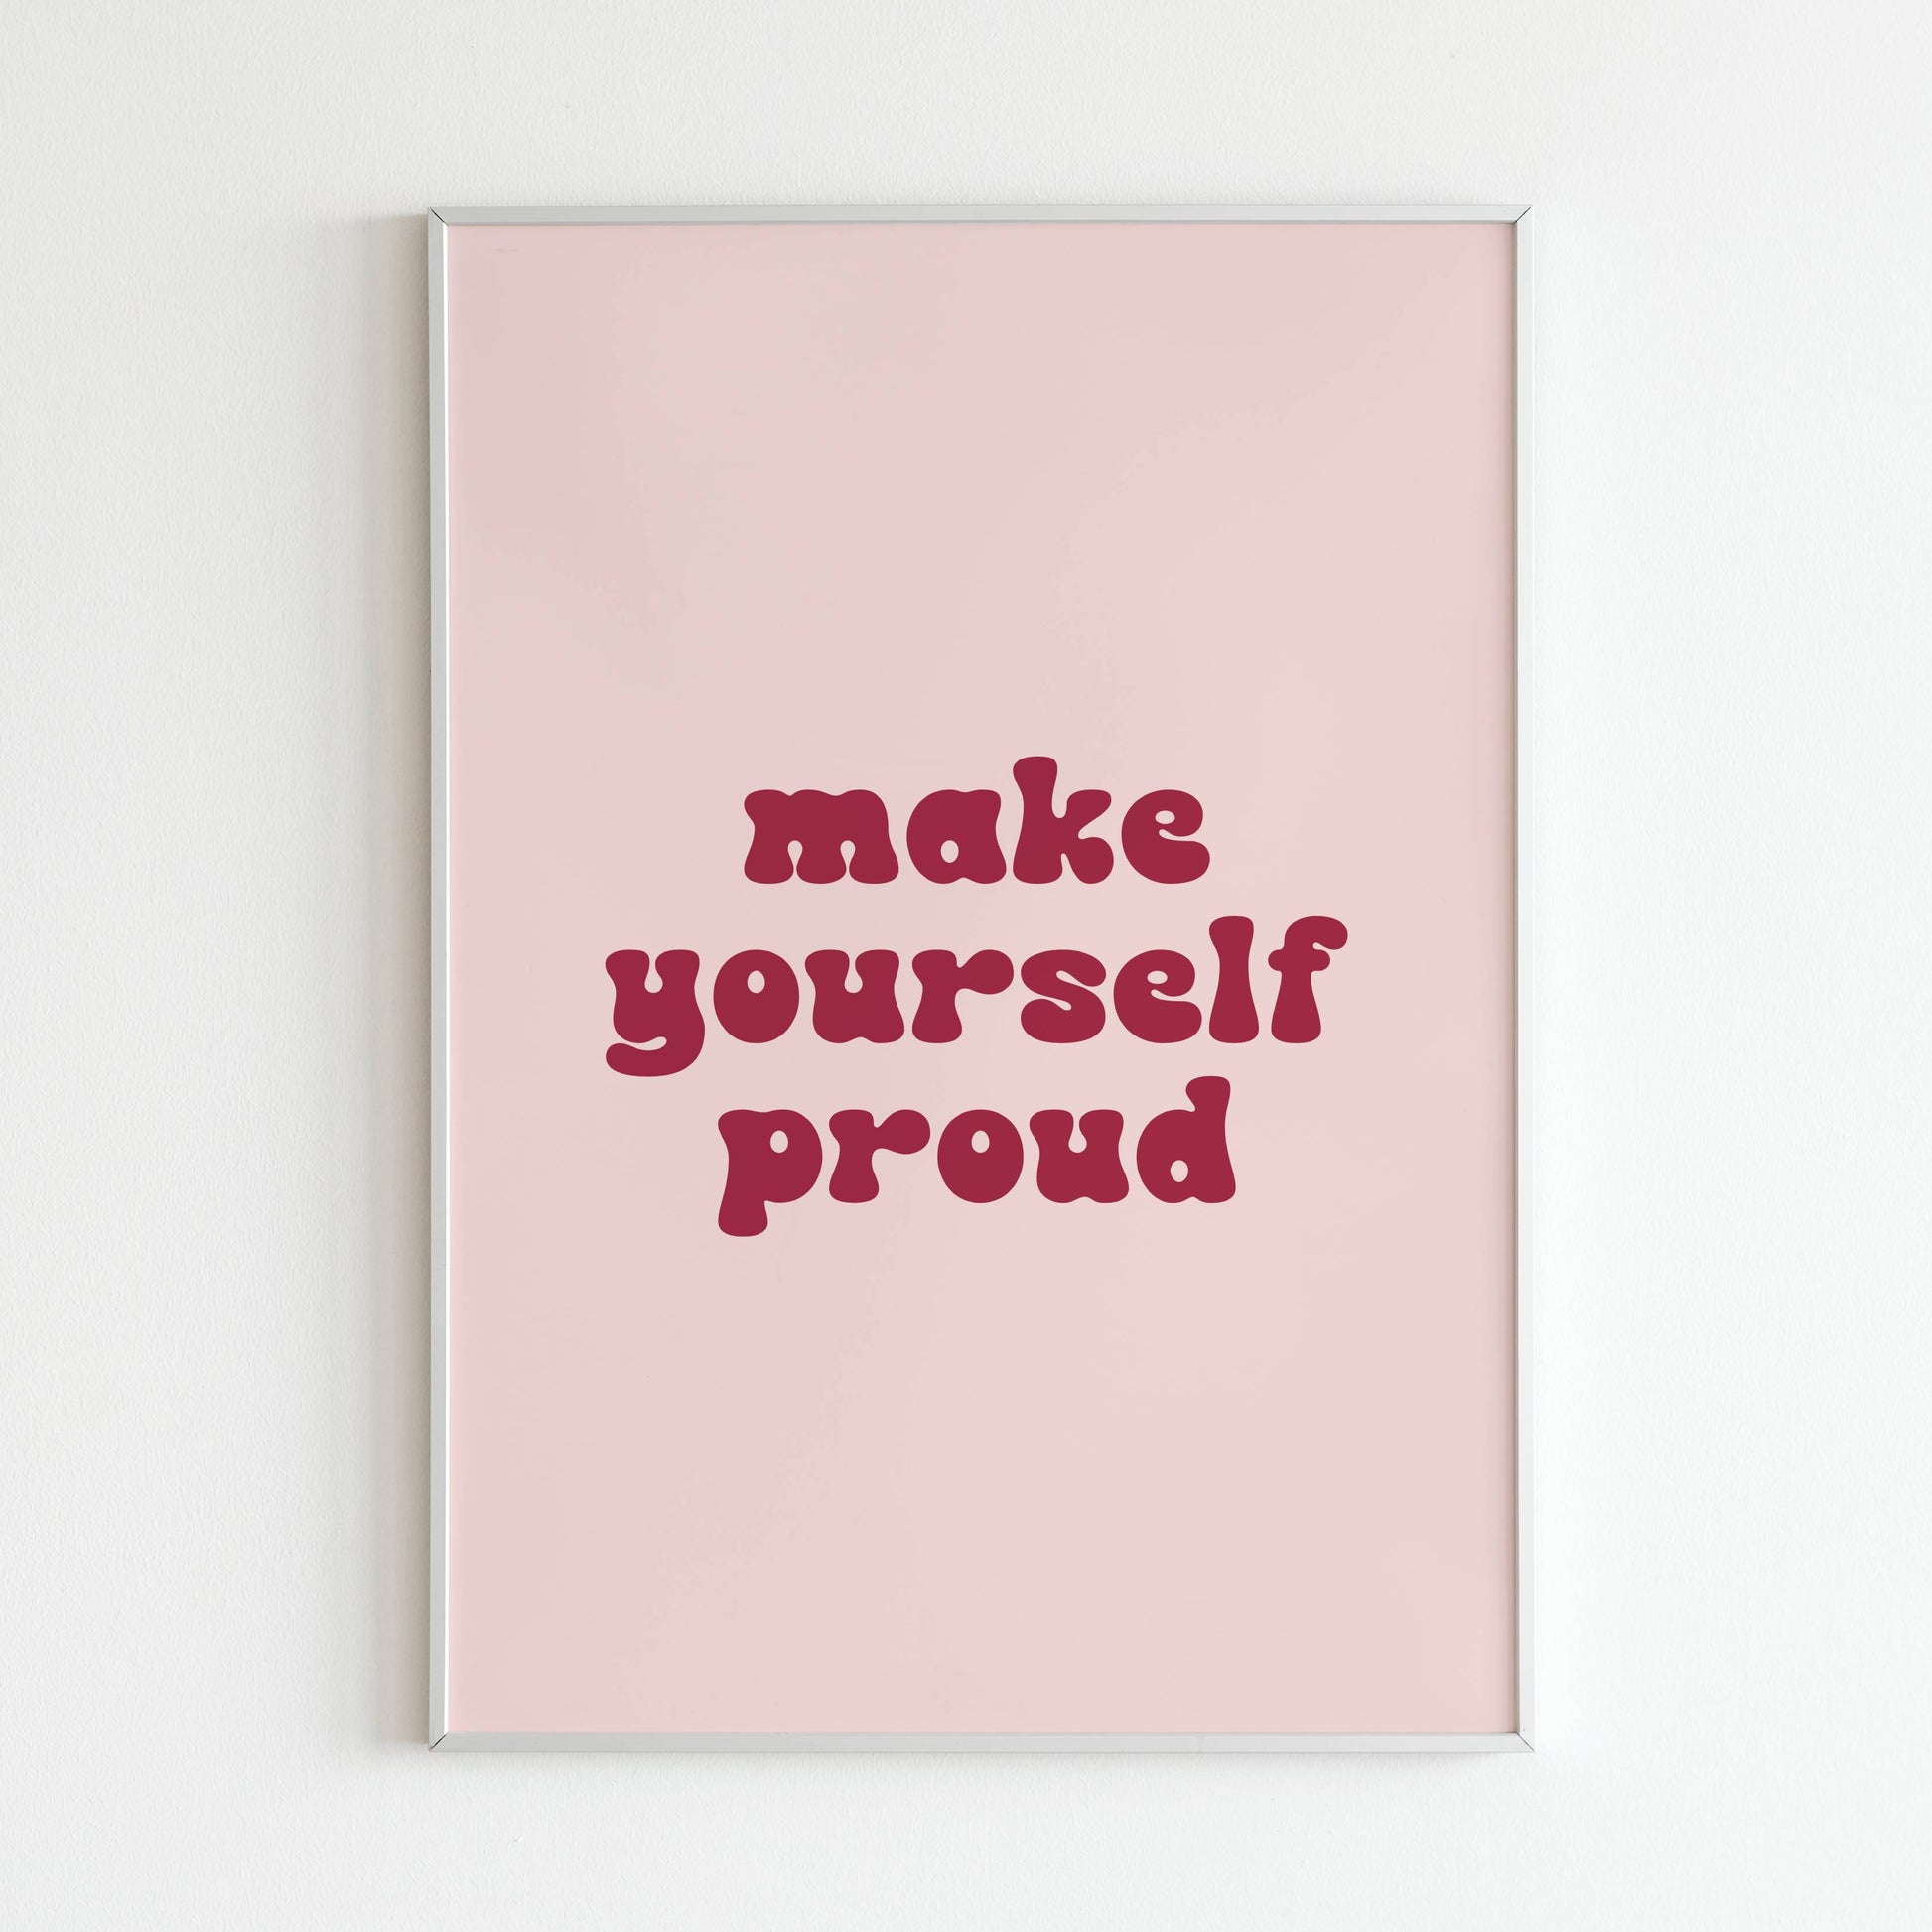 Make Yourself Proud close-up of printable wall art poster. Focus on the bold lettering and motivational message.